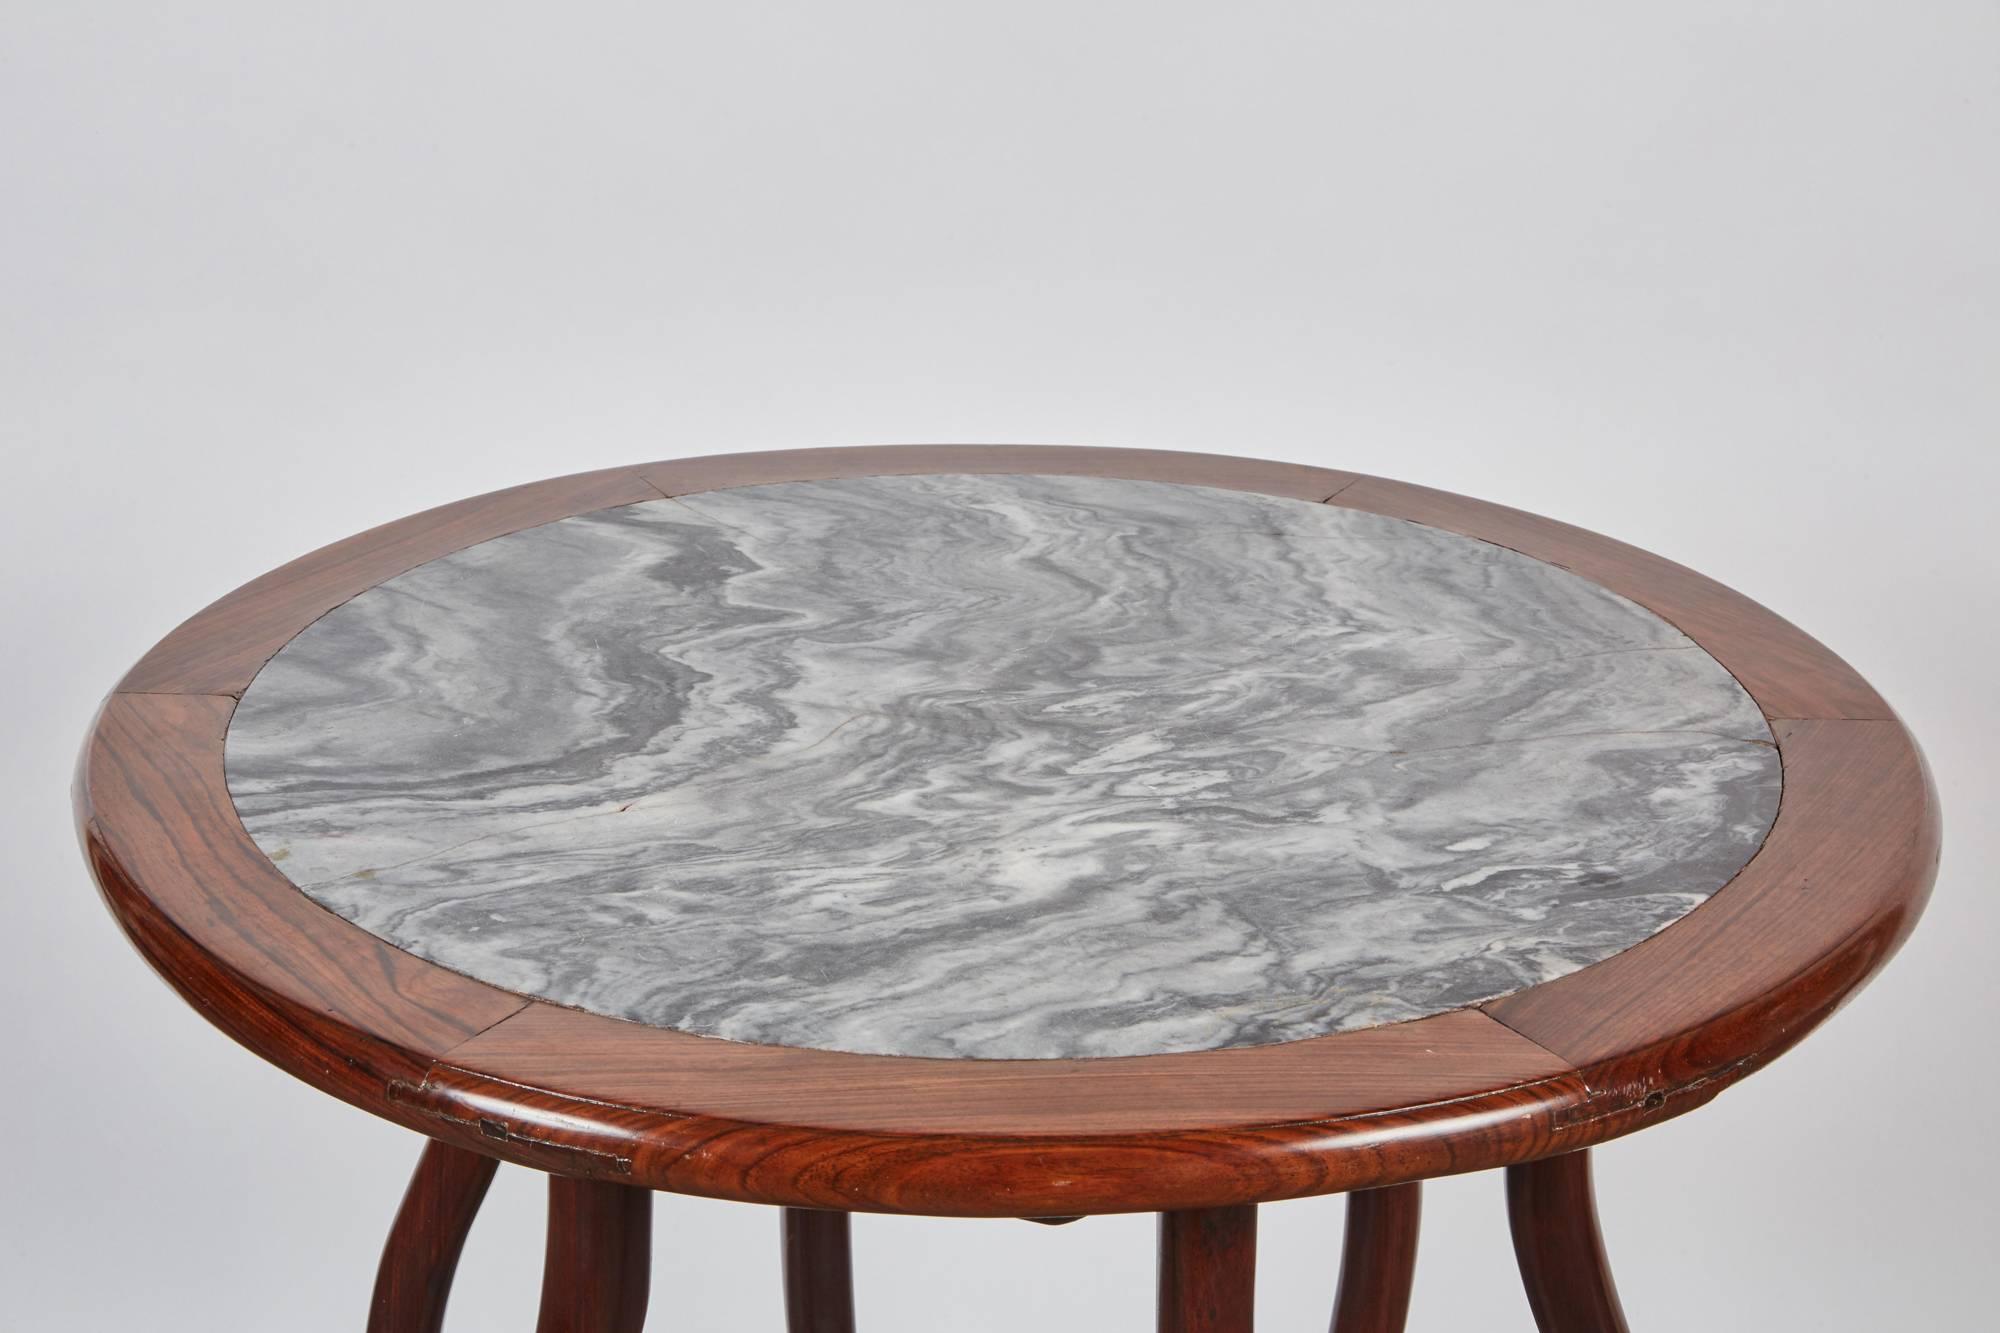 A two-piece folding table, from the Qing Dynasty, that has a rosewood base with a white and gray marble detachable tabletop. This late 19th century Chinese round rosewood folding table also features a set of six uniquely shaped legs.